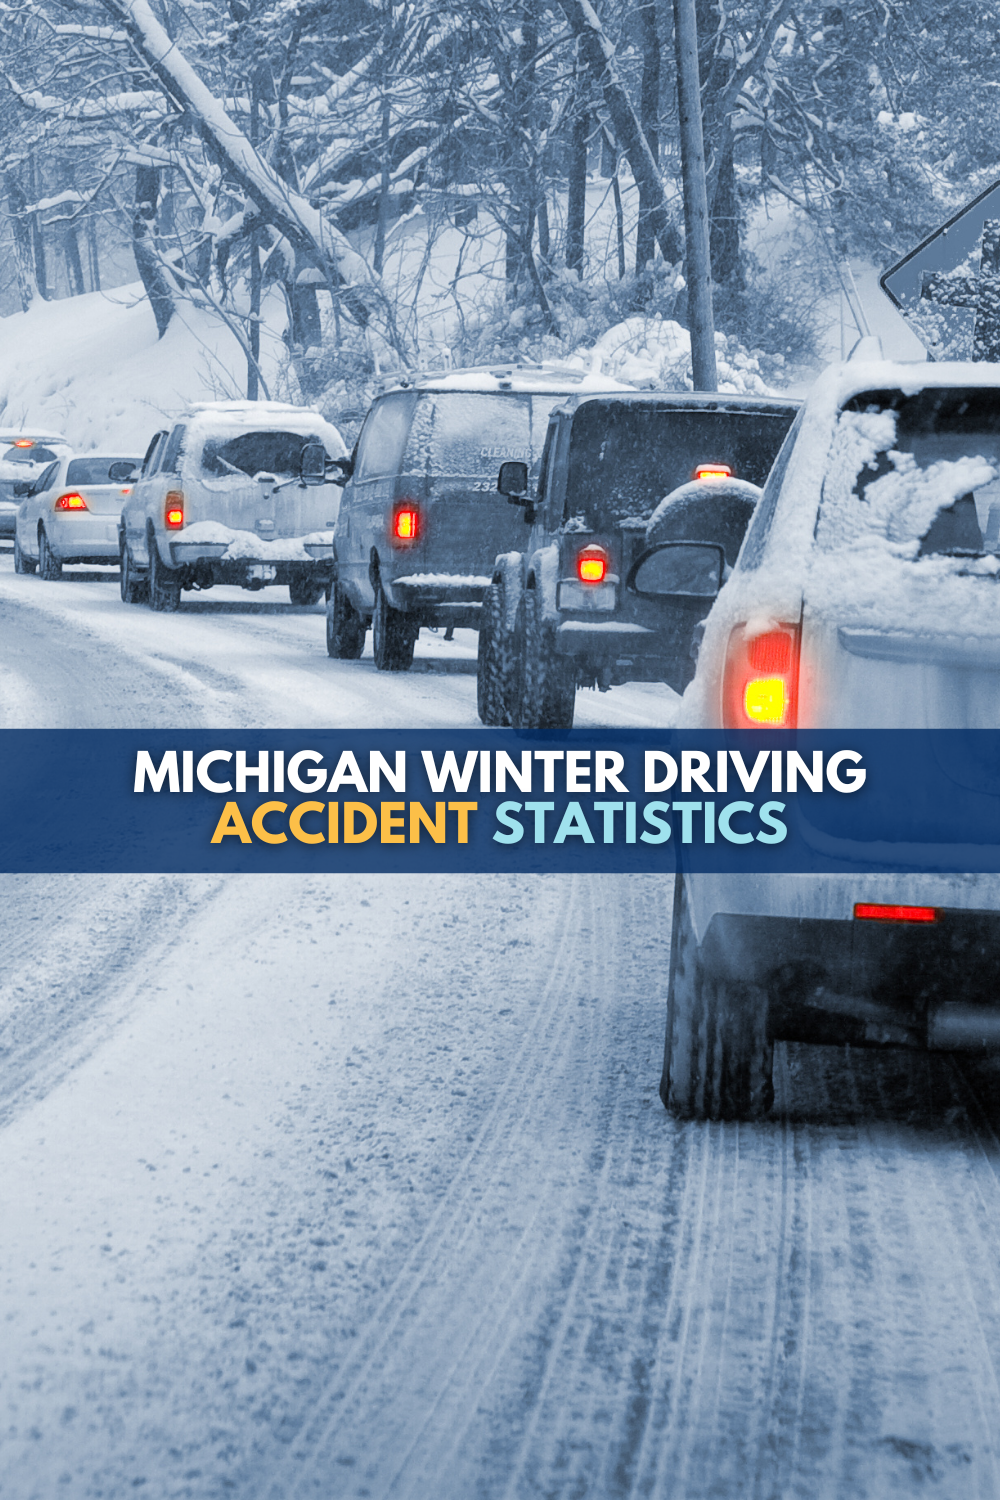 Michigan Winter Driving Accident Statistics: What You Need To Know